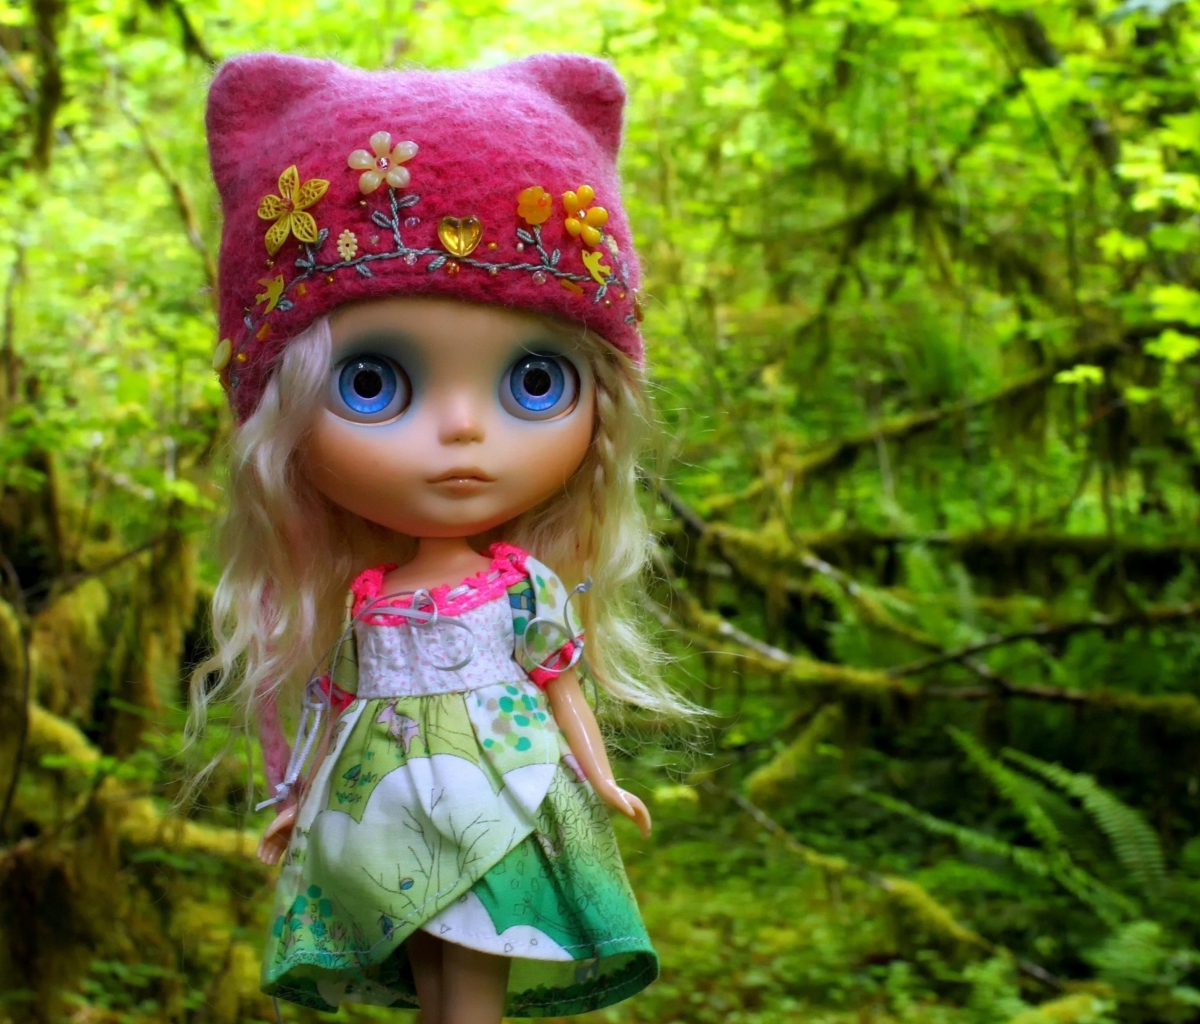 Cute Blonde Doll In Forest wallpaper 1200x1024